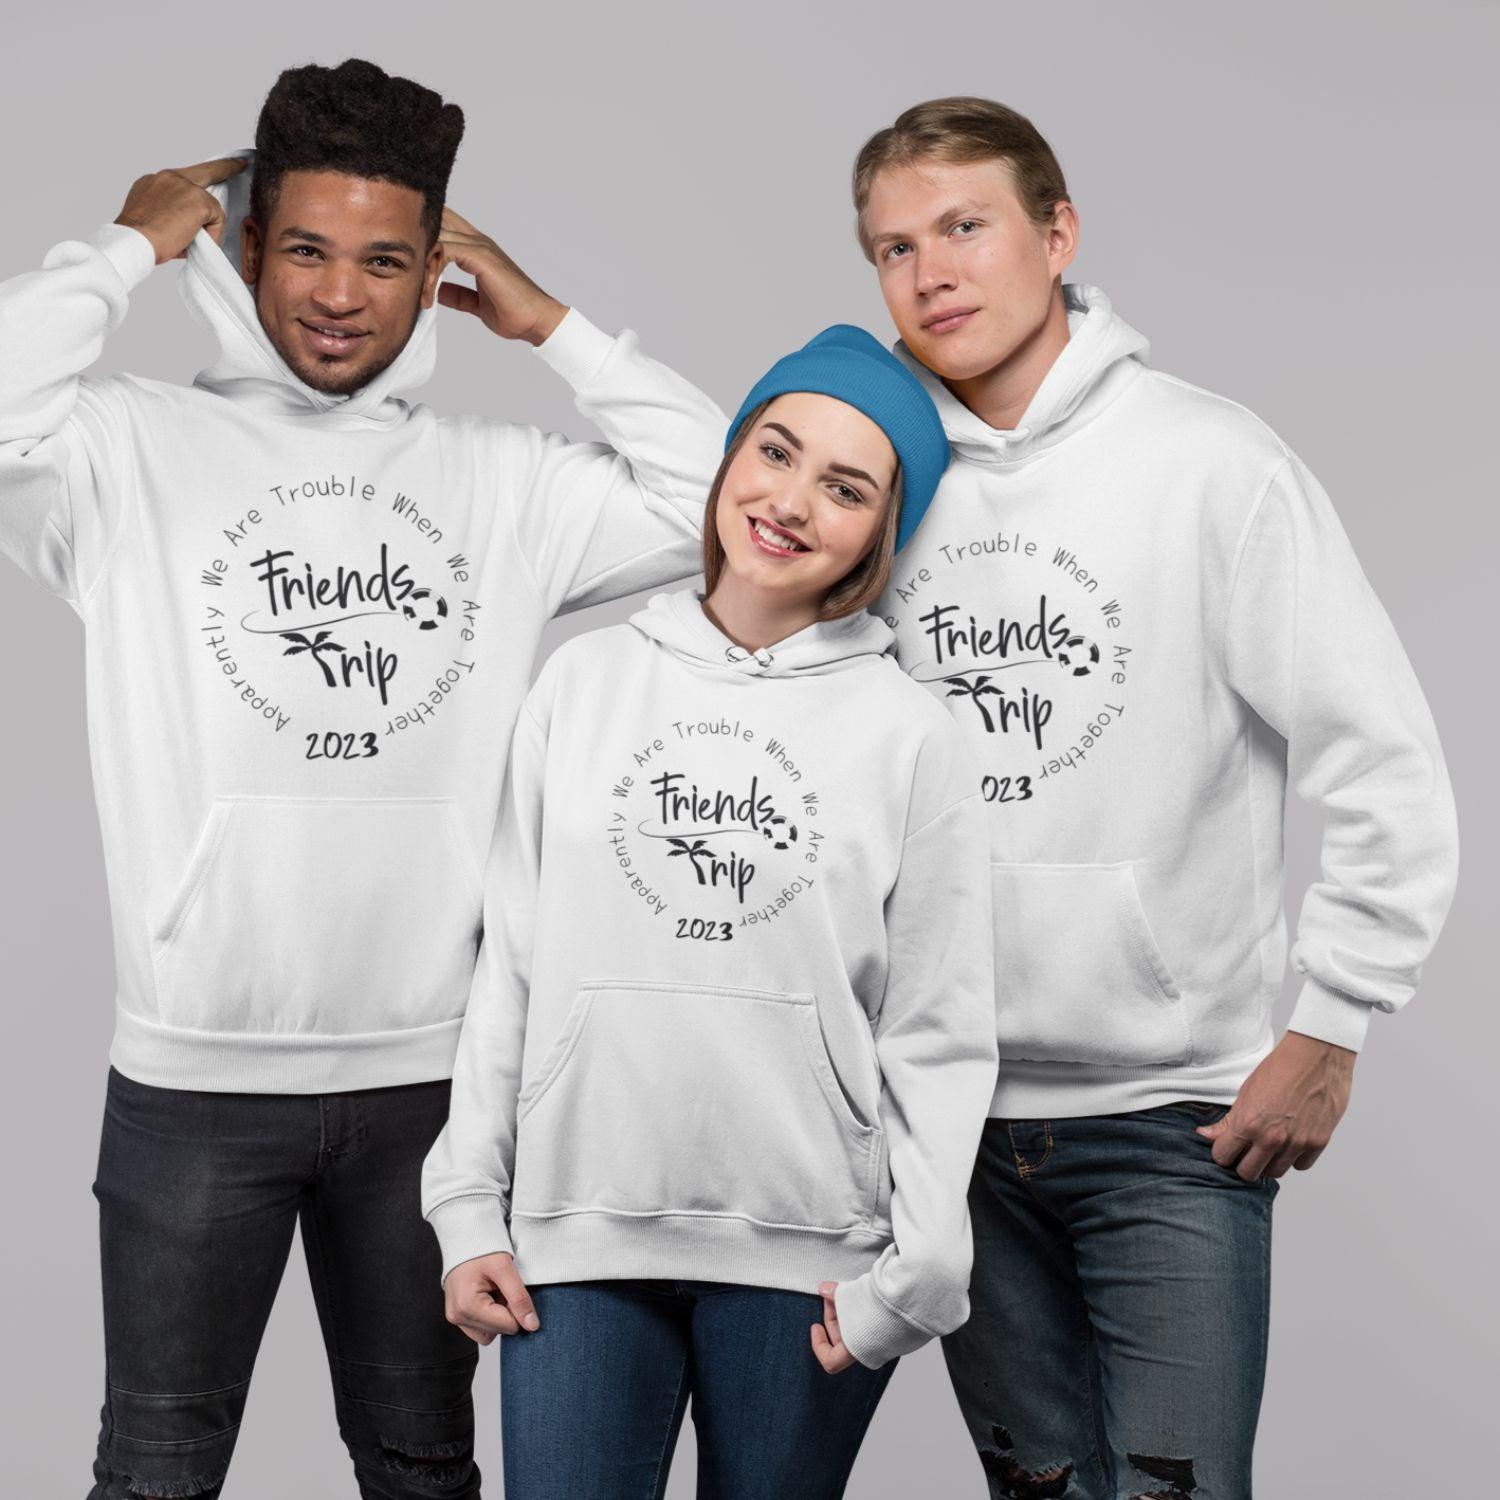 Friends Trip: Custom Matching Outfits, We Are Trouble Together! Squad Goals, BFF, Friends Gifts - 4Lovebirds